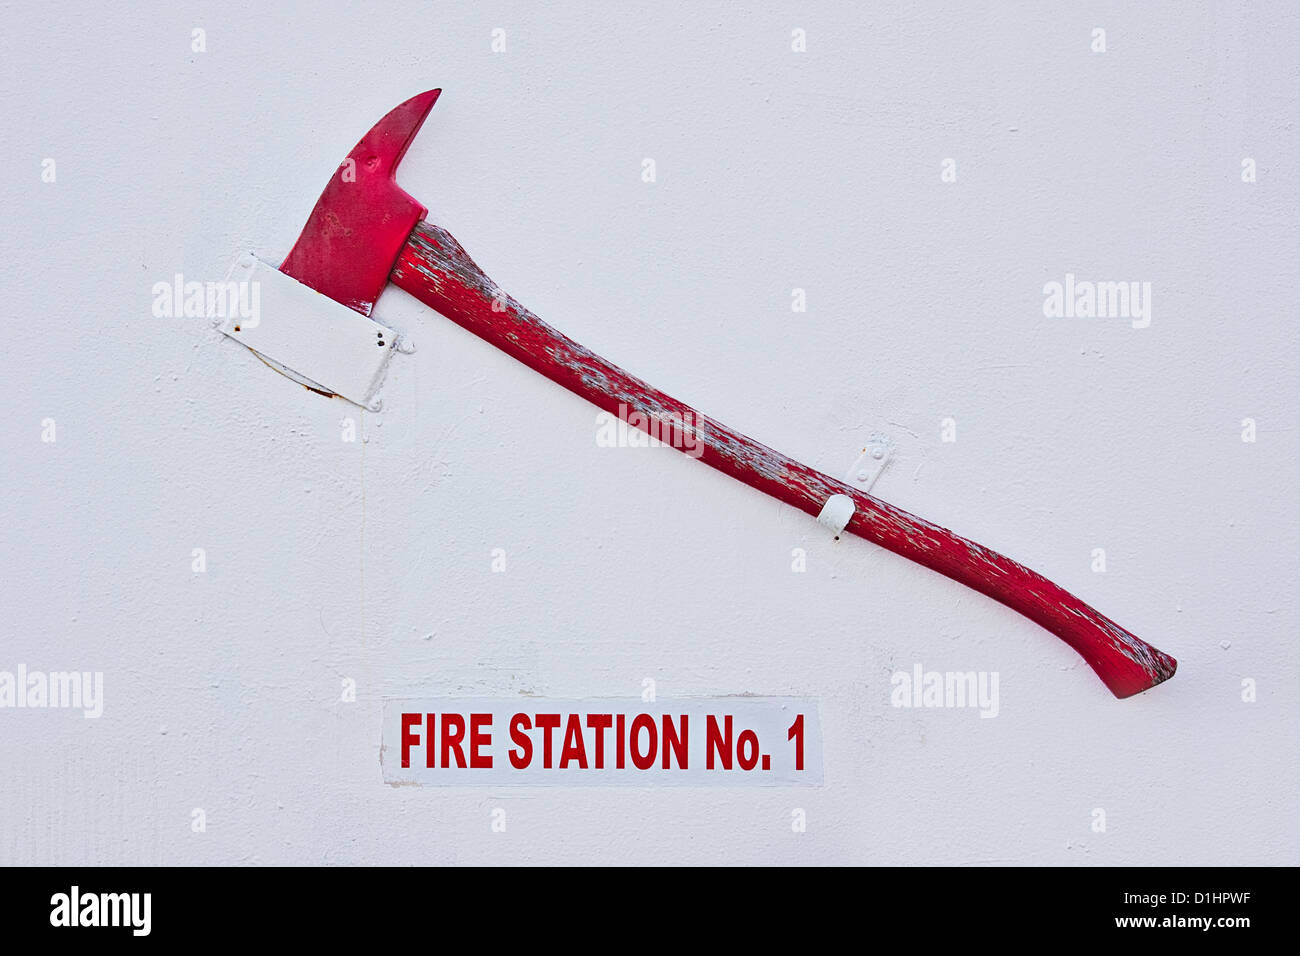 A red ax hanging on a white wall of a fire station. There is also a Fire Station sign in red letters. Stock Photo